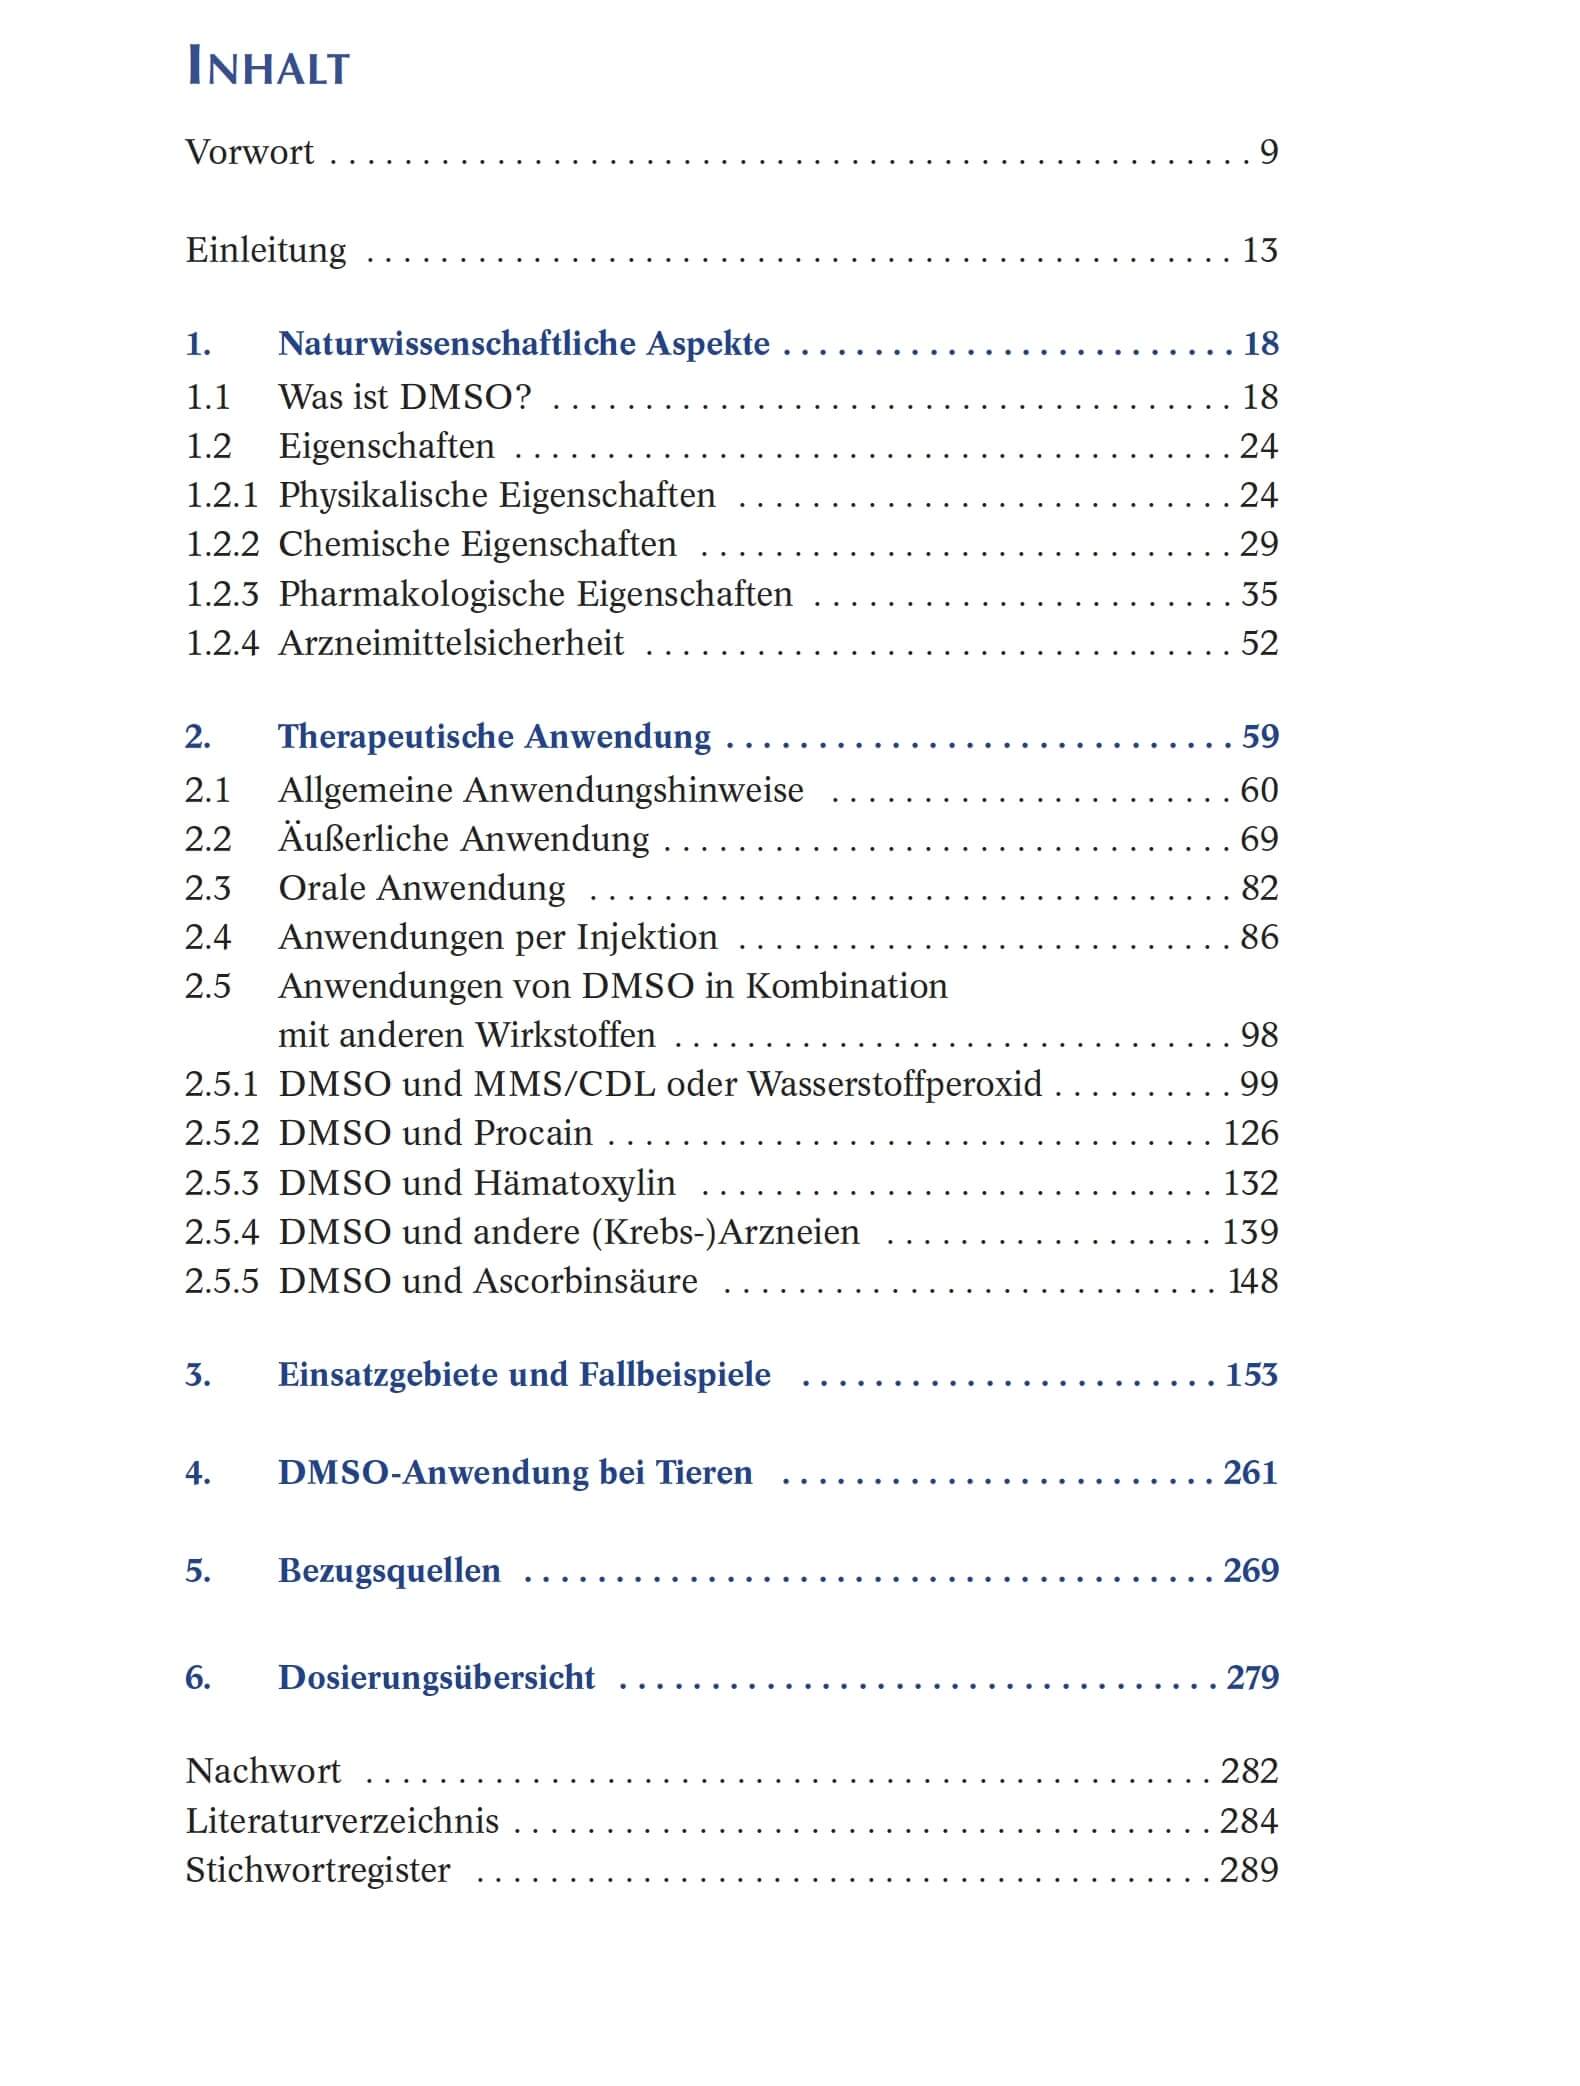 The DMSO Handbook - Hidden Healing Knowledge (Over 22 recipes for DMSO to imitate)